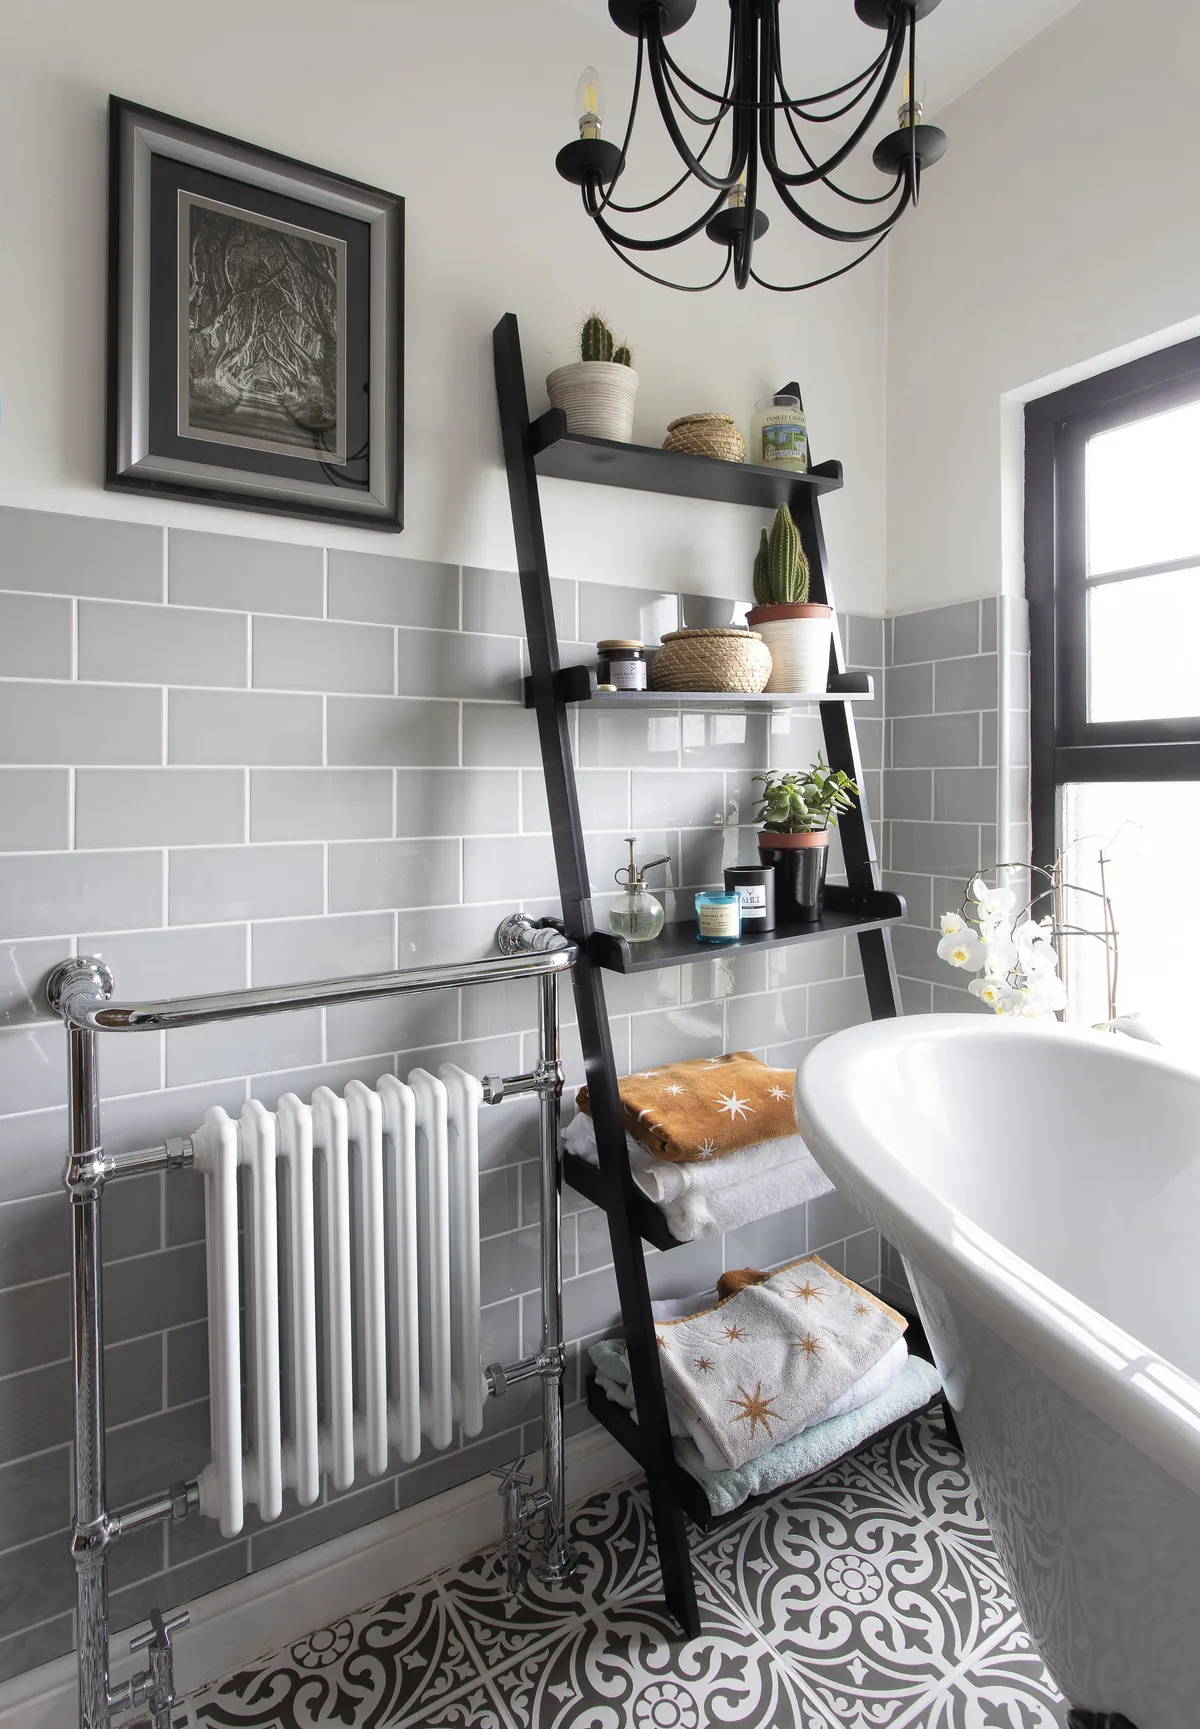 Good idea! For smaller bathrooms, go for versatile storage that can slot into unused space, like this ladder unit.